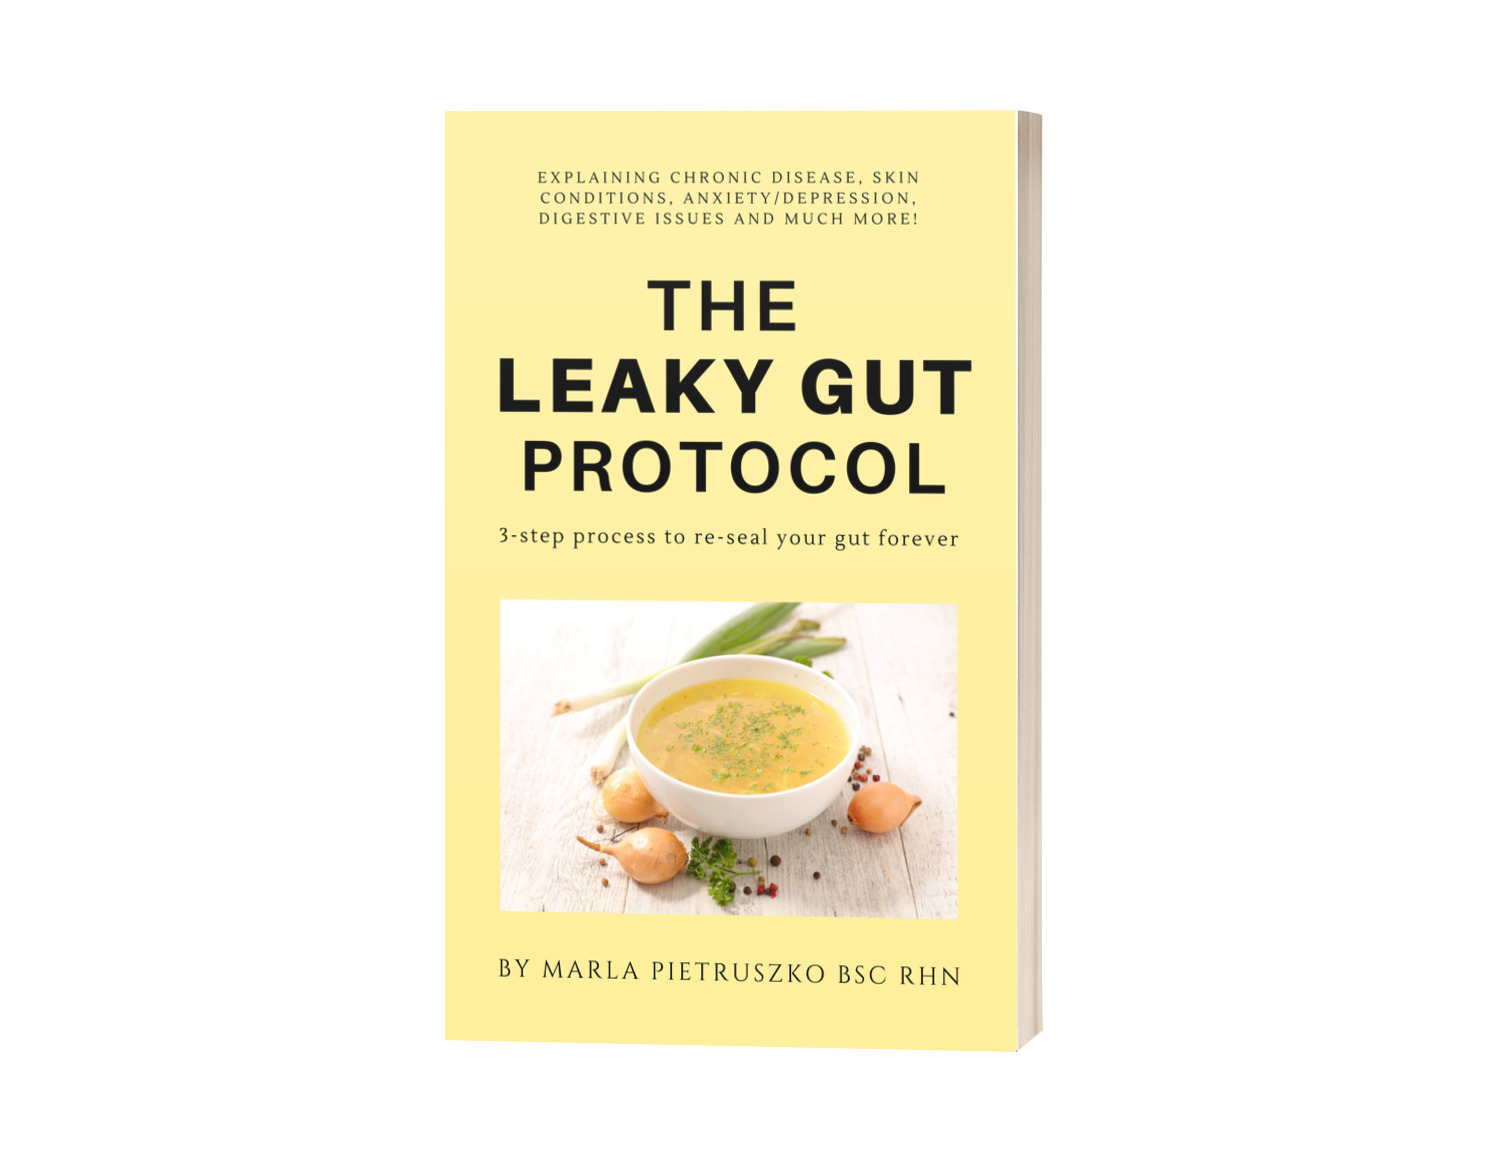 The leaky gut protocol